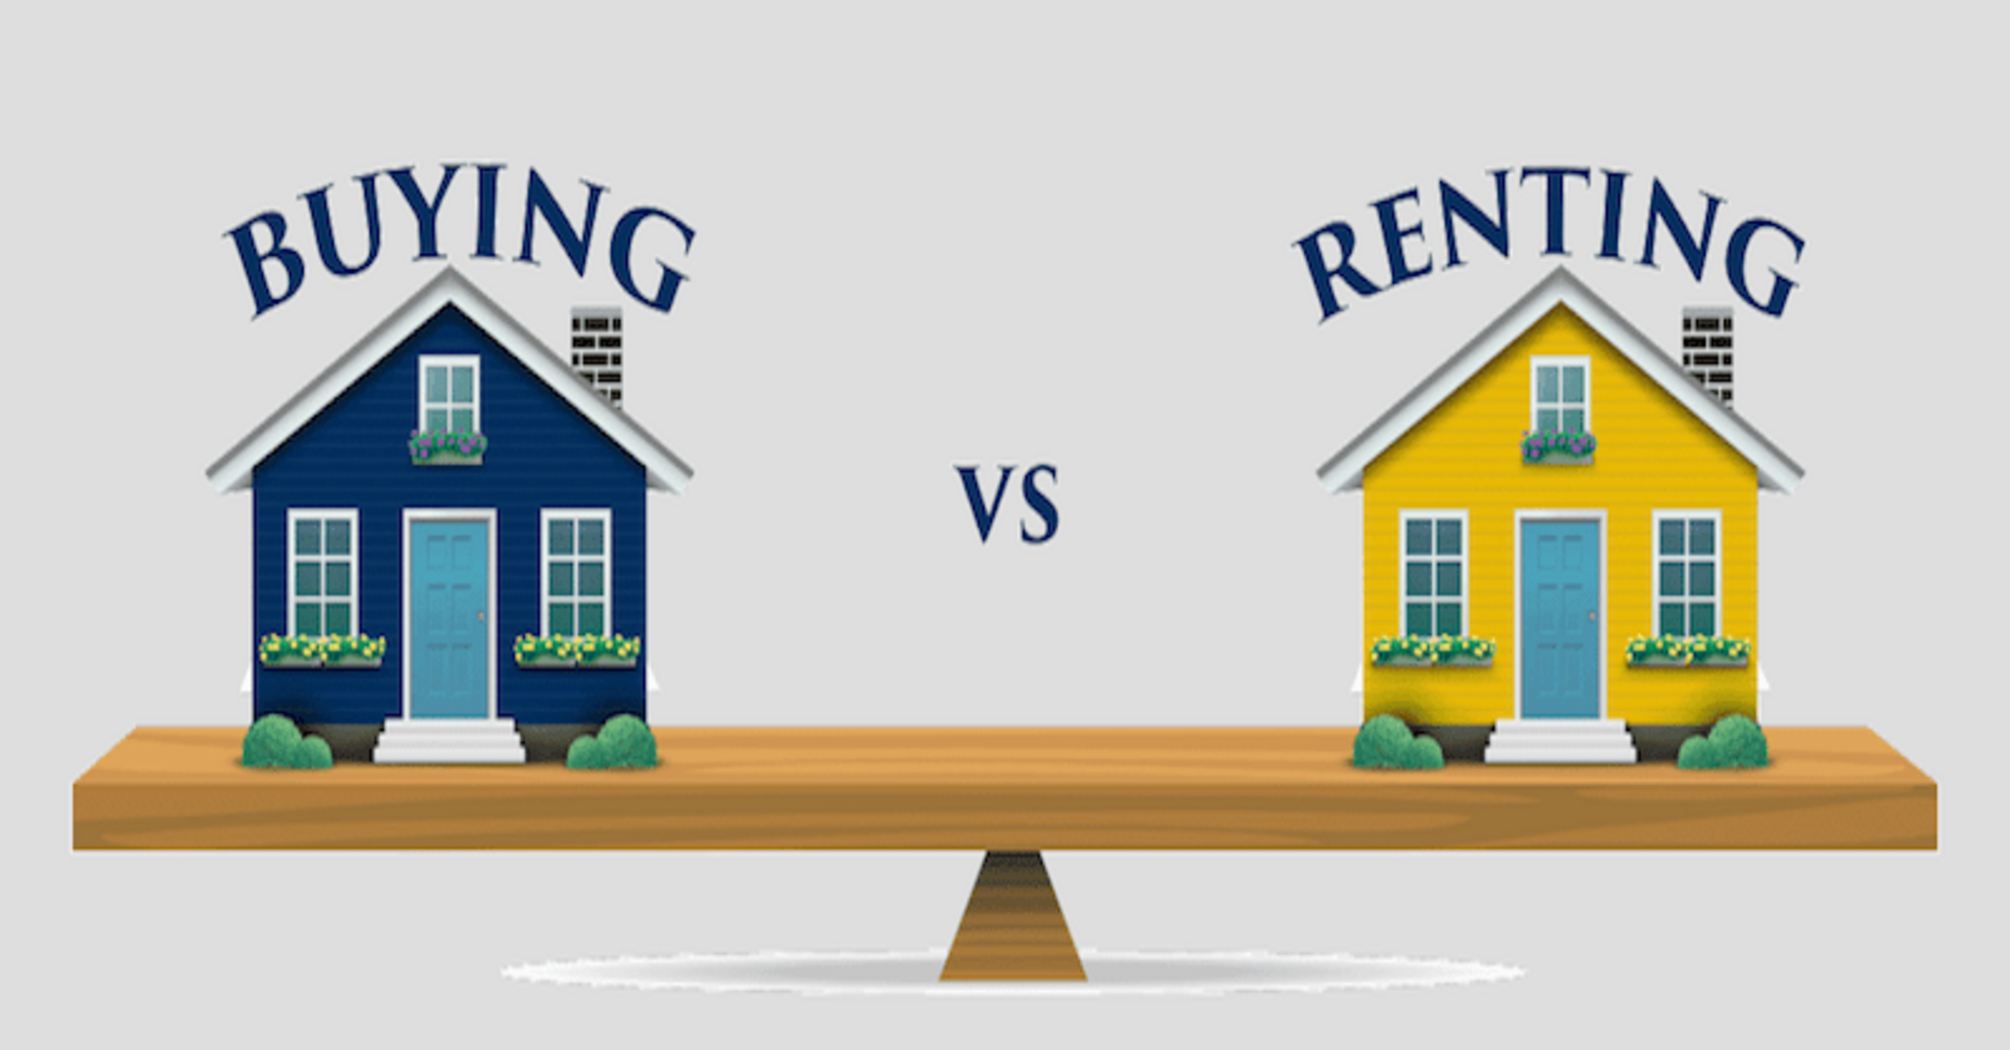 Renting an apartment or buying your own